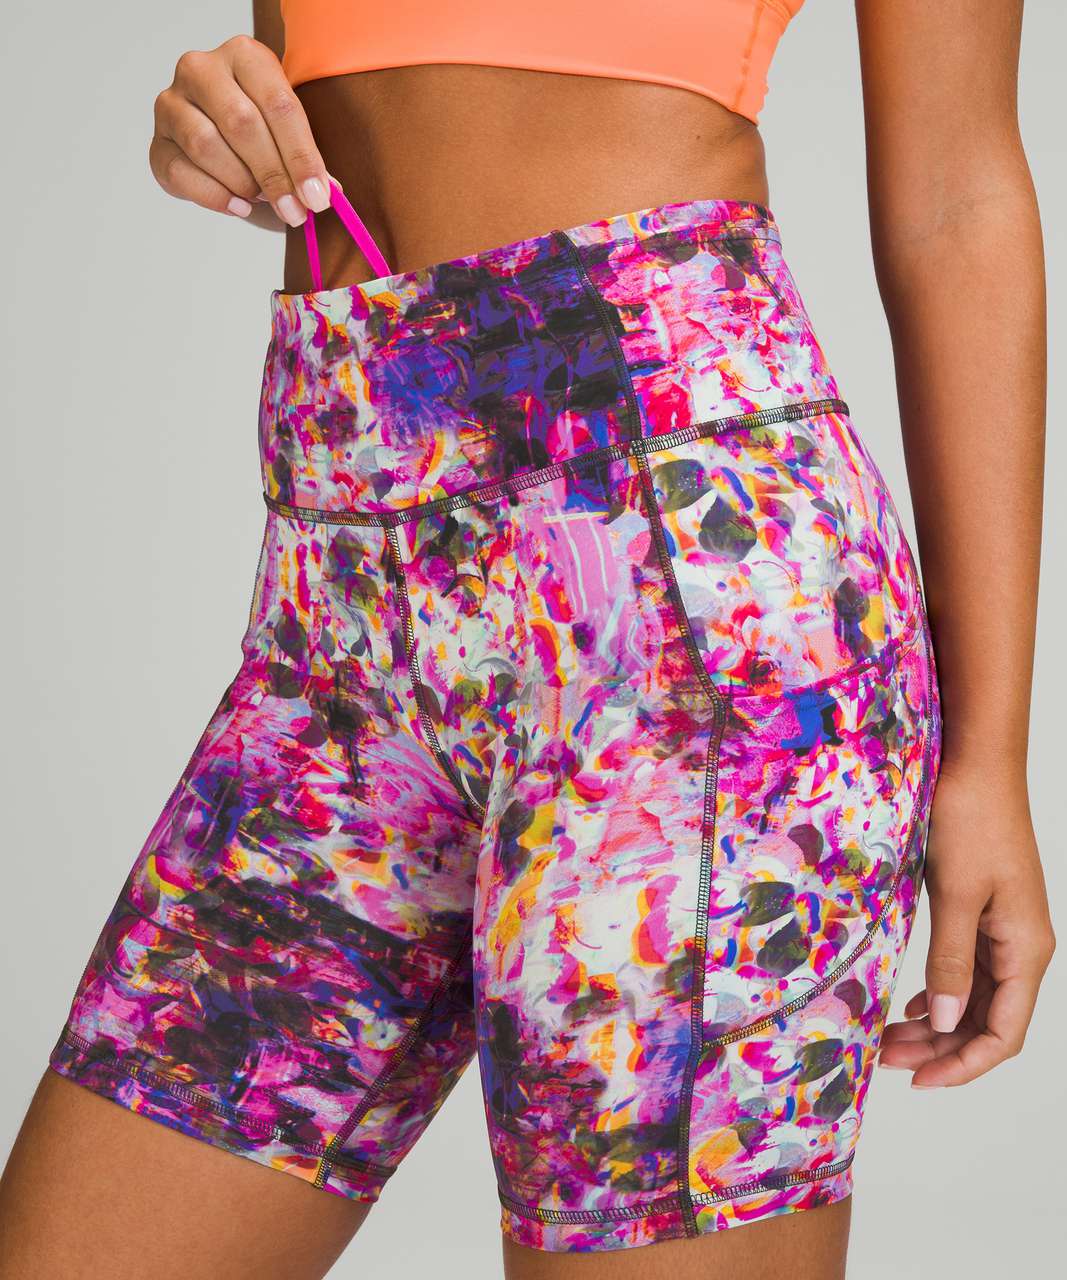 Lululemon SeaWheeze Fast and Free High-Rise Short 8" - Flash Floral Multi